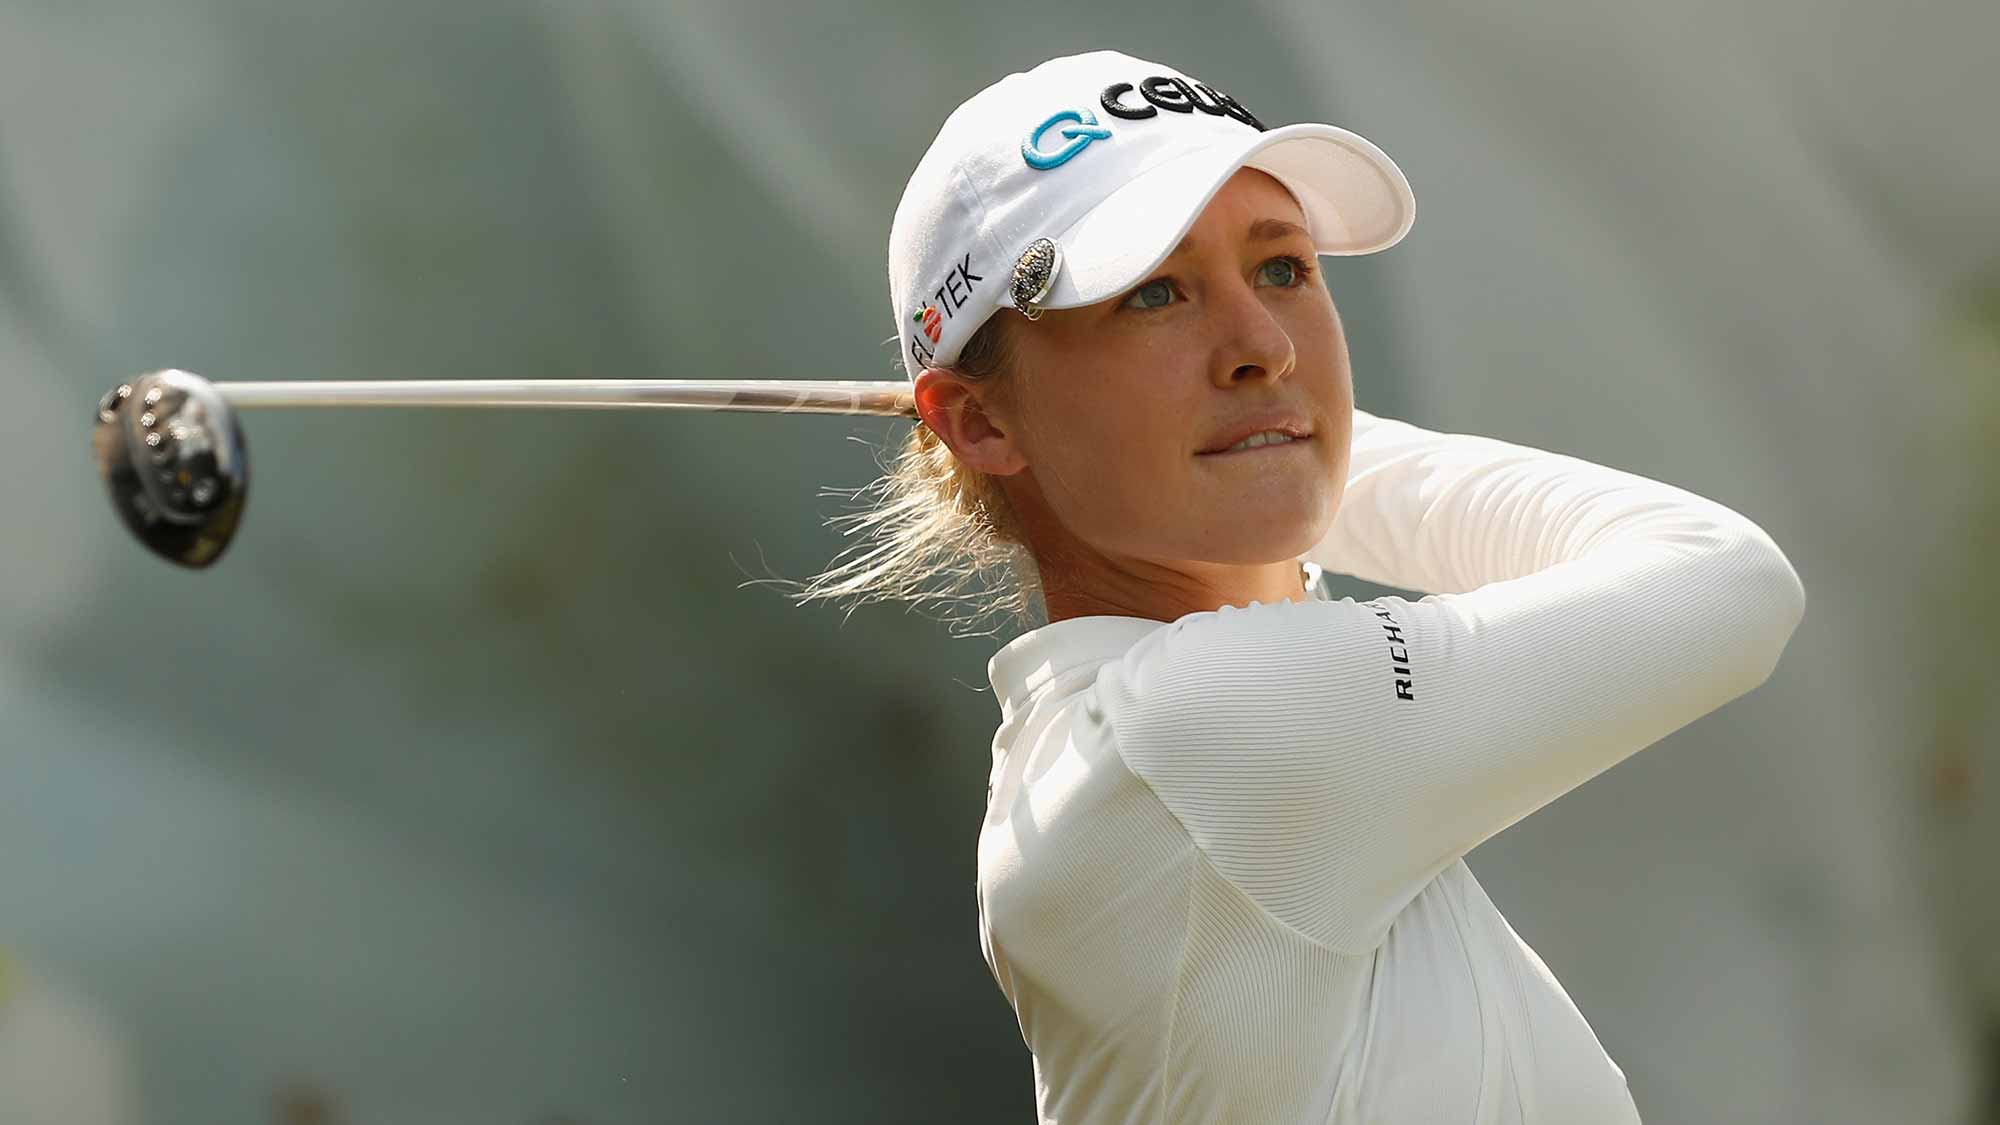 Nelly Korda of United States plays a shot during the second round of the Swinging Skirts LPGA Taiwan Championship at Ta Shee Golf & Country Club on October 26, 2018 in Taoyuan, Chinese Taipei